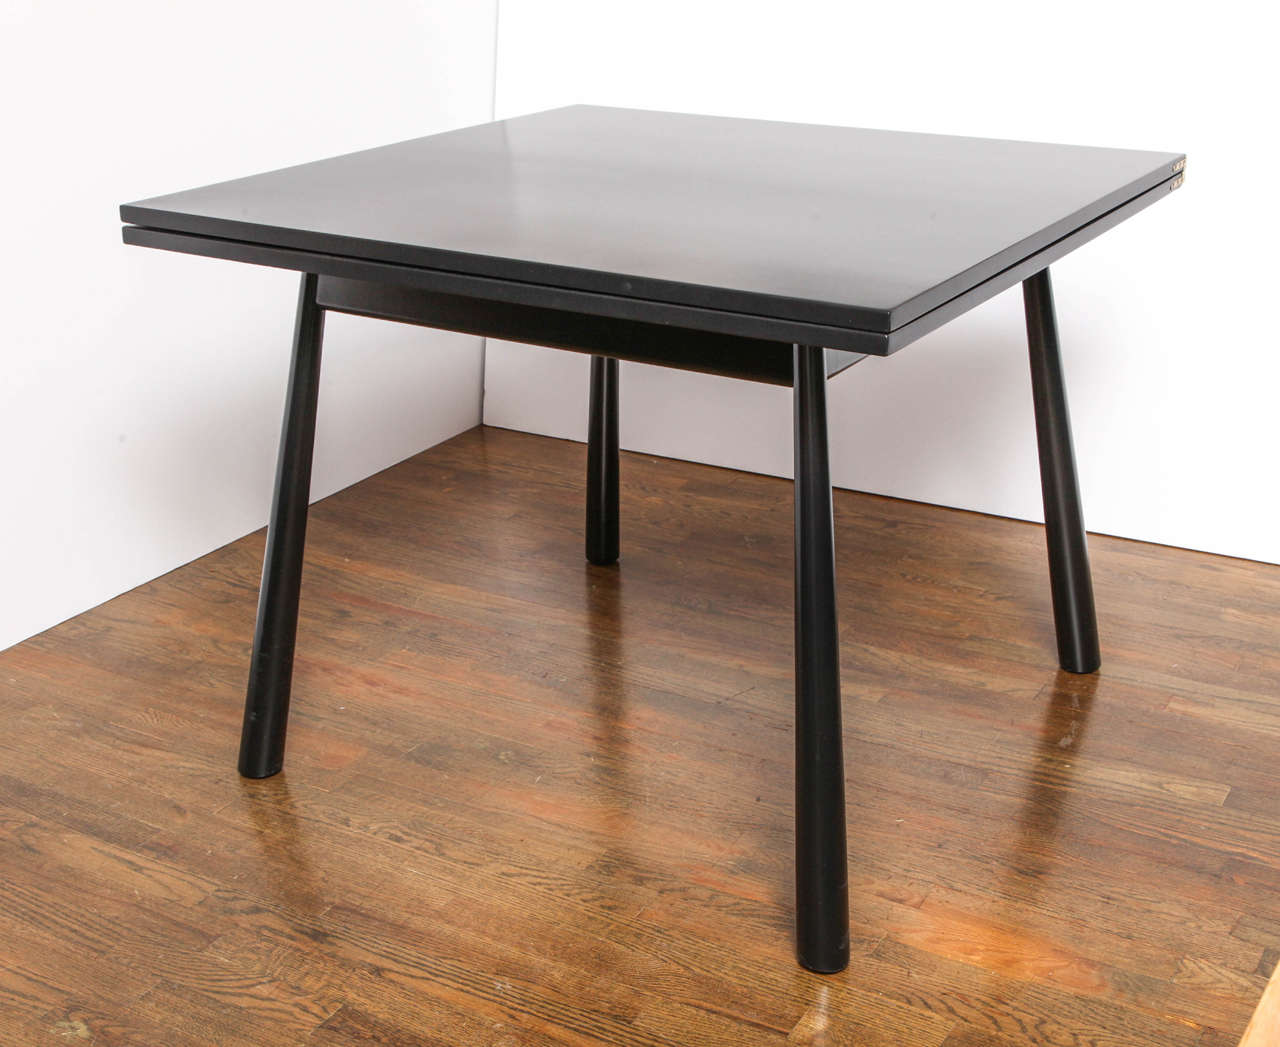 Black lacquered flip-top dining table by T.H. Robsjohn Gibbings.  Folds into a 38